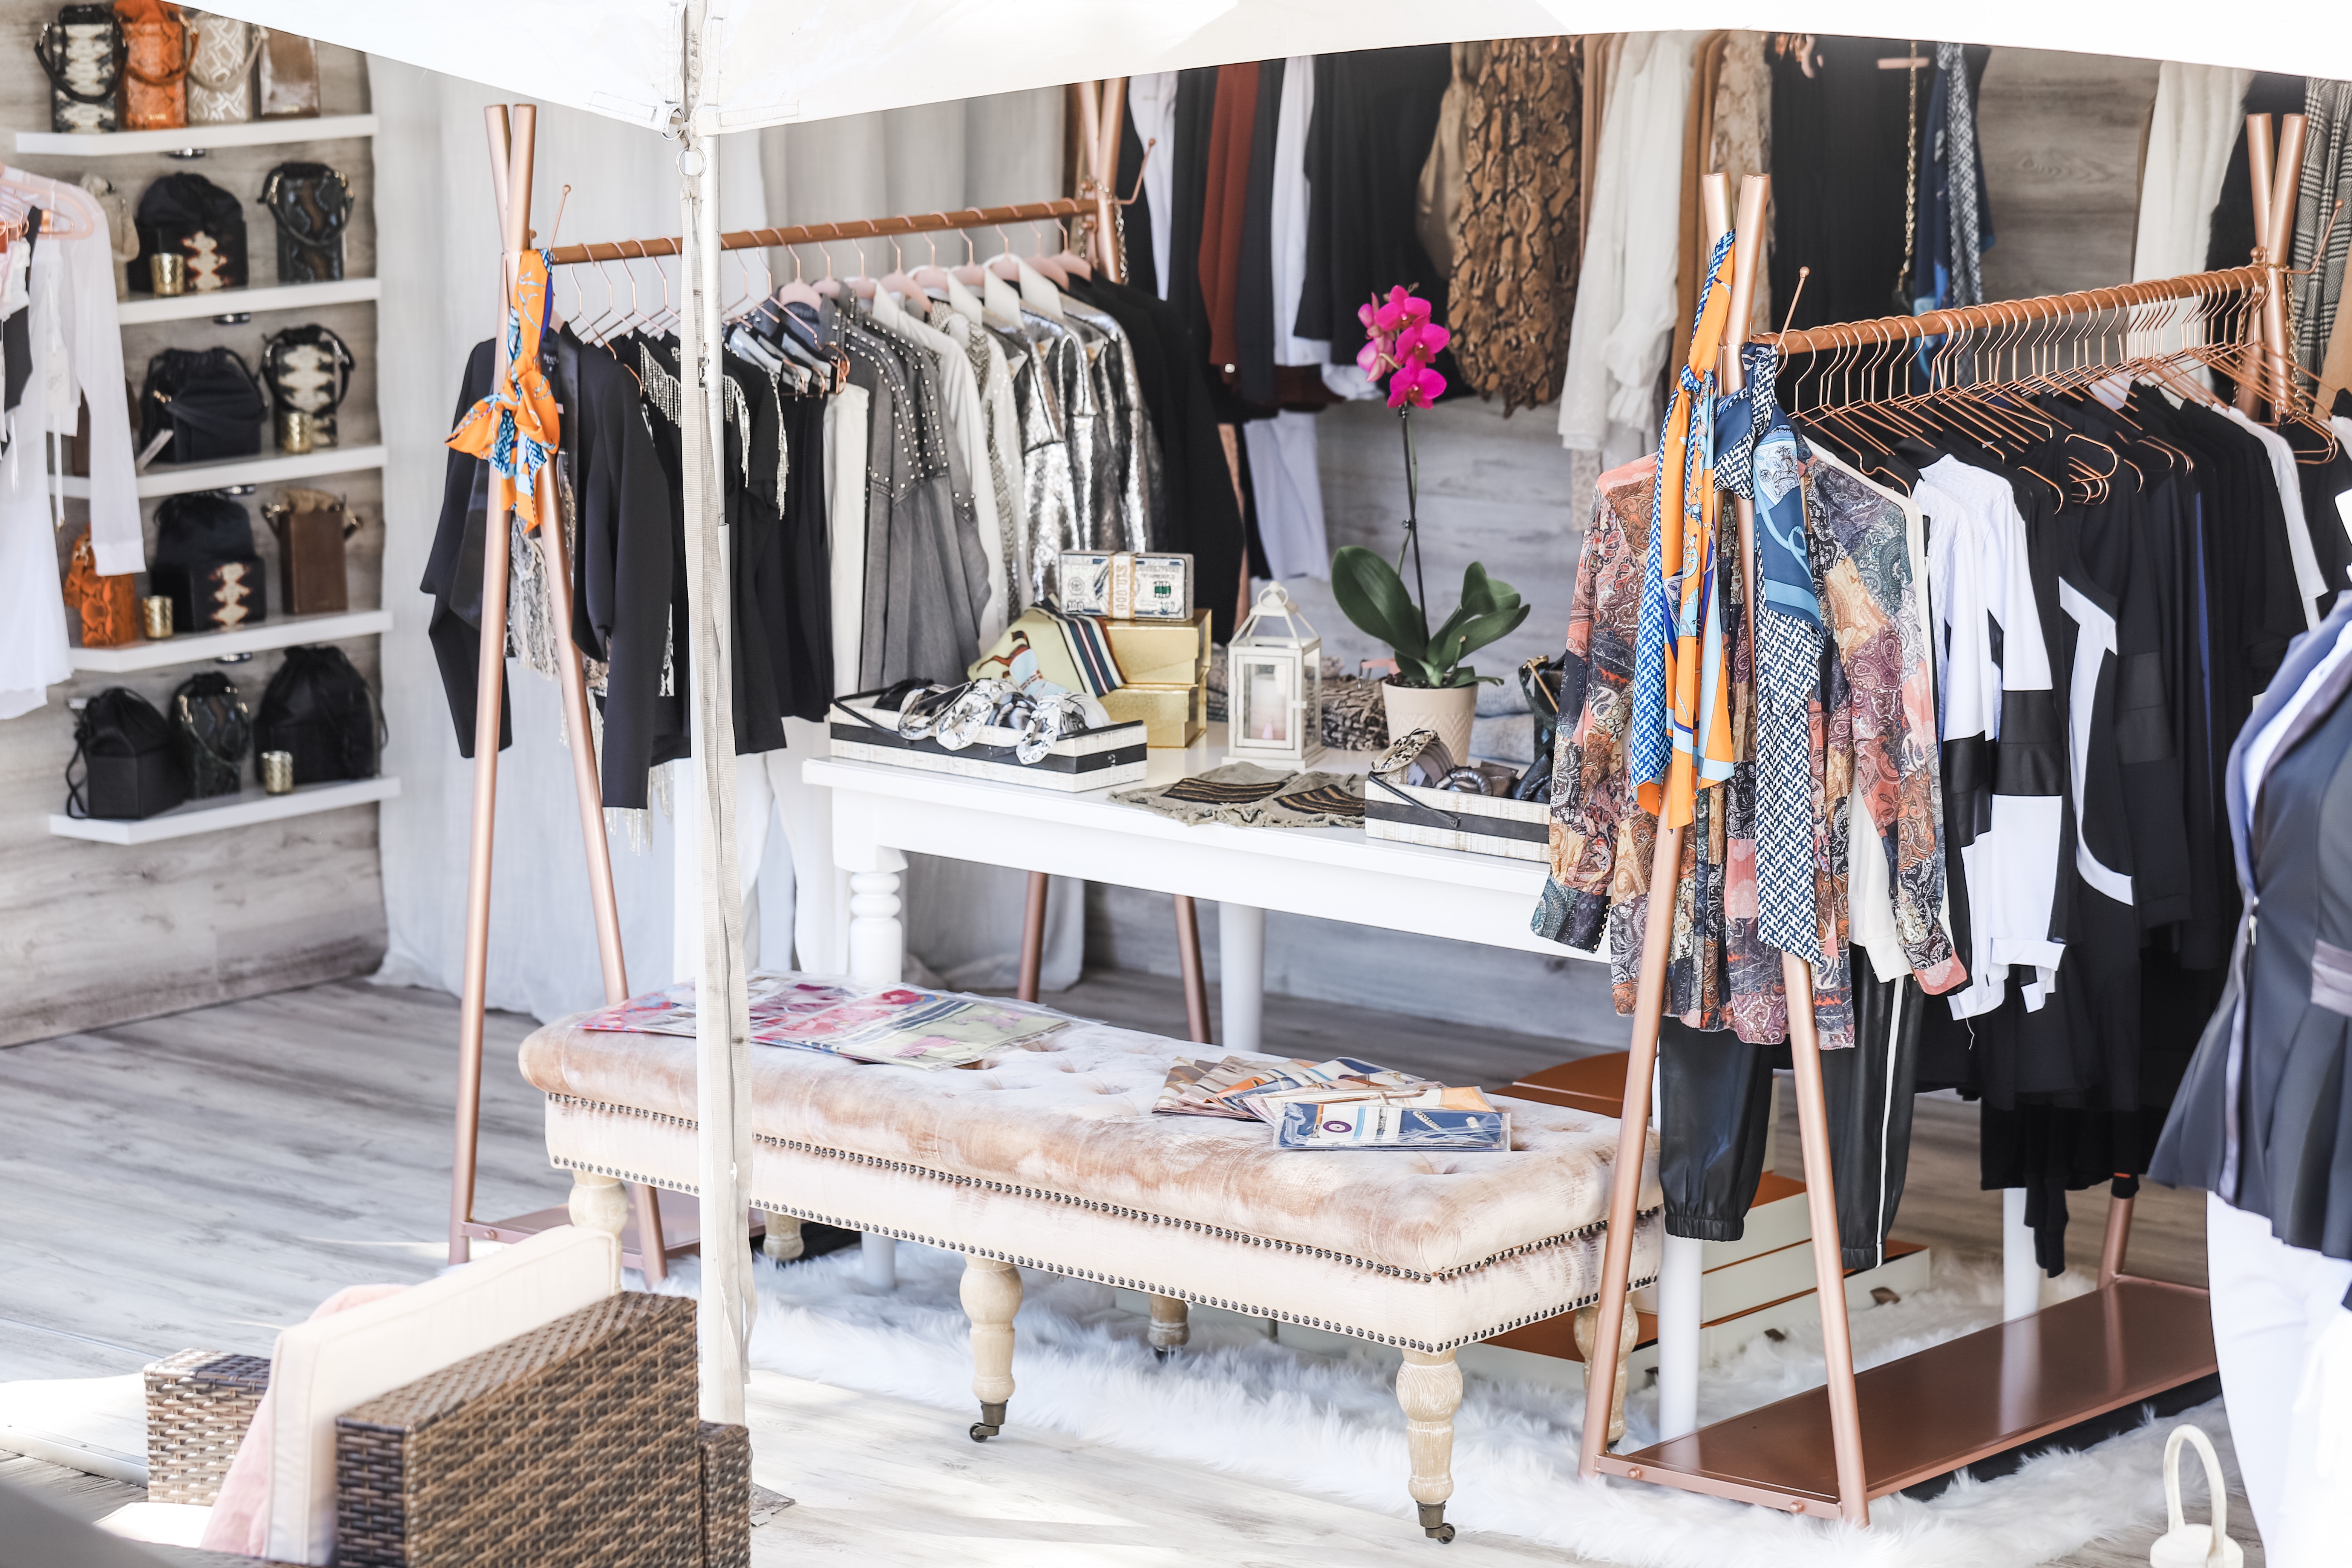 Must Haves' Shopping at the Winter Equestrian Festival - Equestrian Stylist